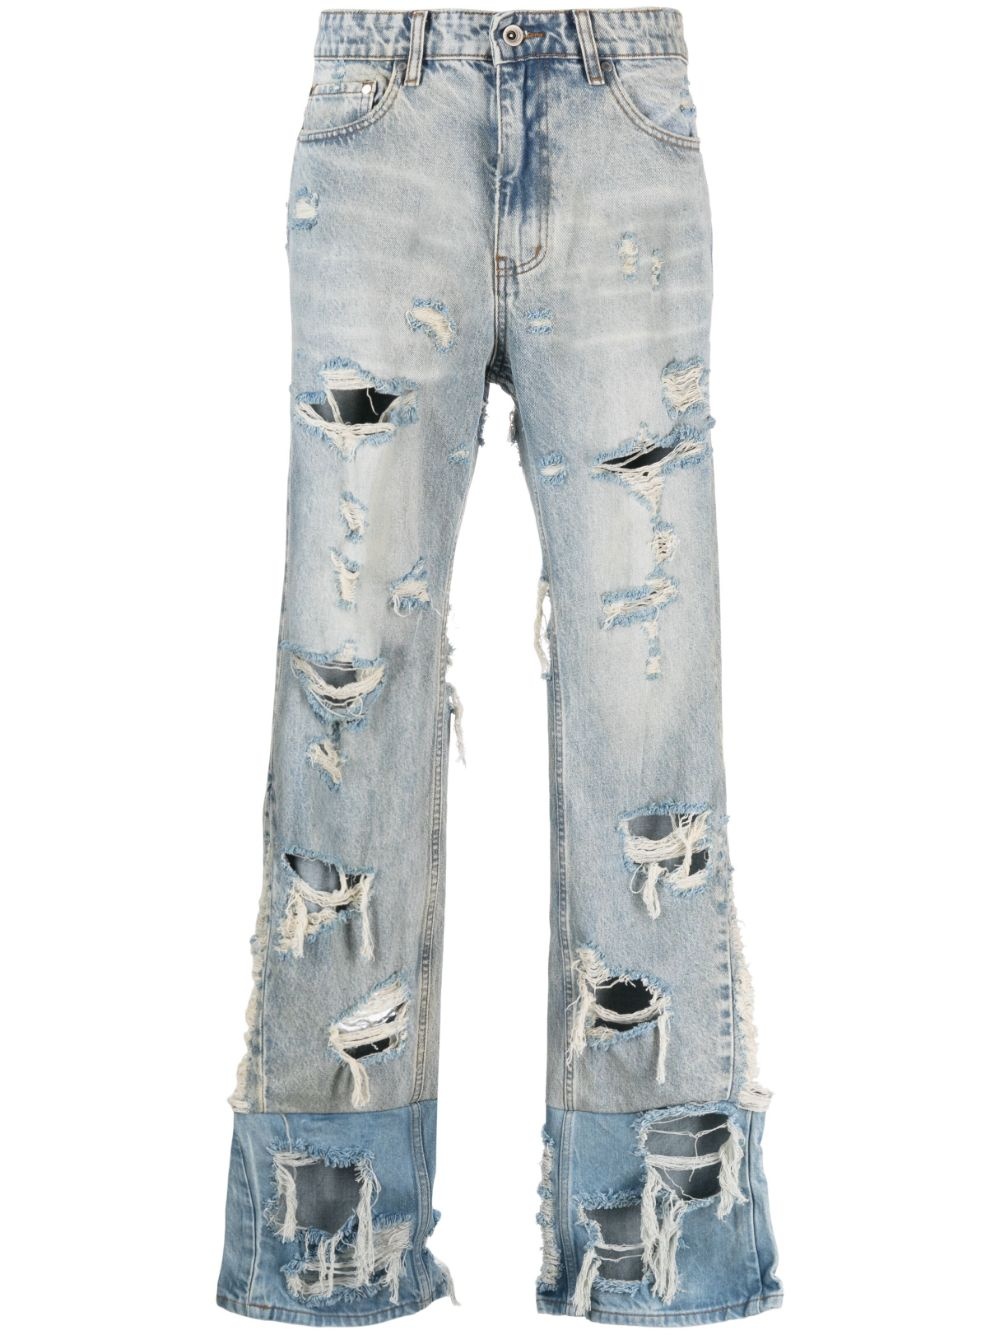 Gnarly distressed jeans - 1